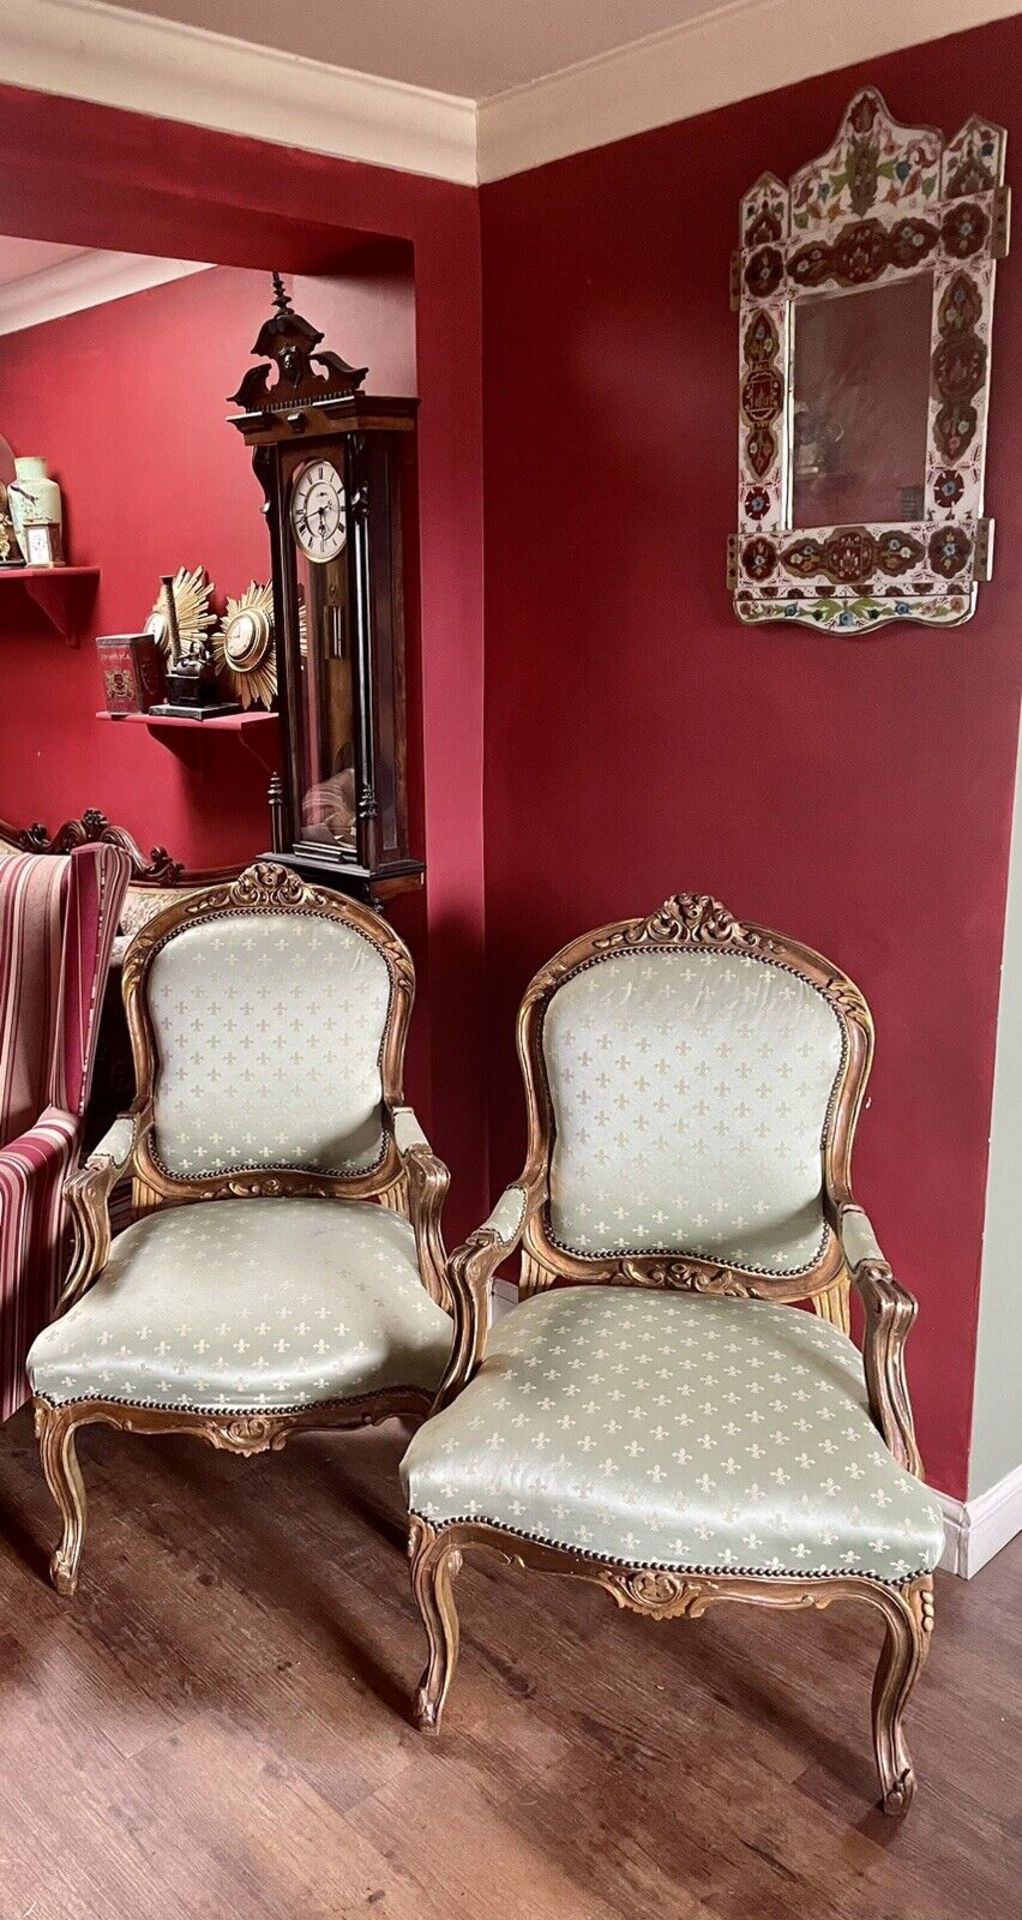 A Pair of Fauteuils In Louis XVI Style Carved Gilt Wood Arm Chairs Upholstered In Fleur De Lys - Image 2 of 10